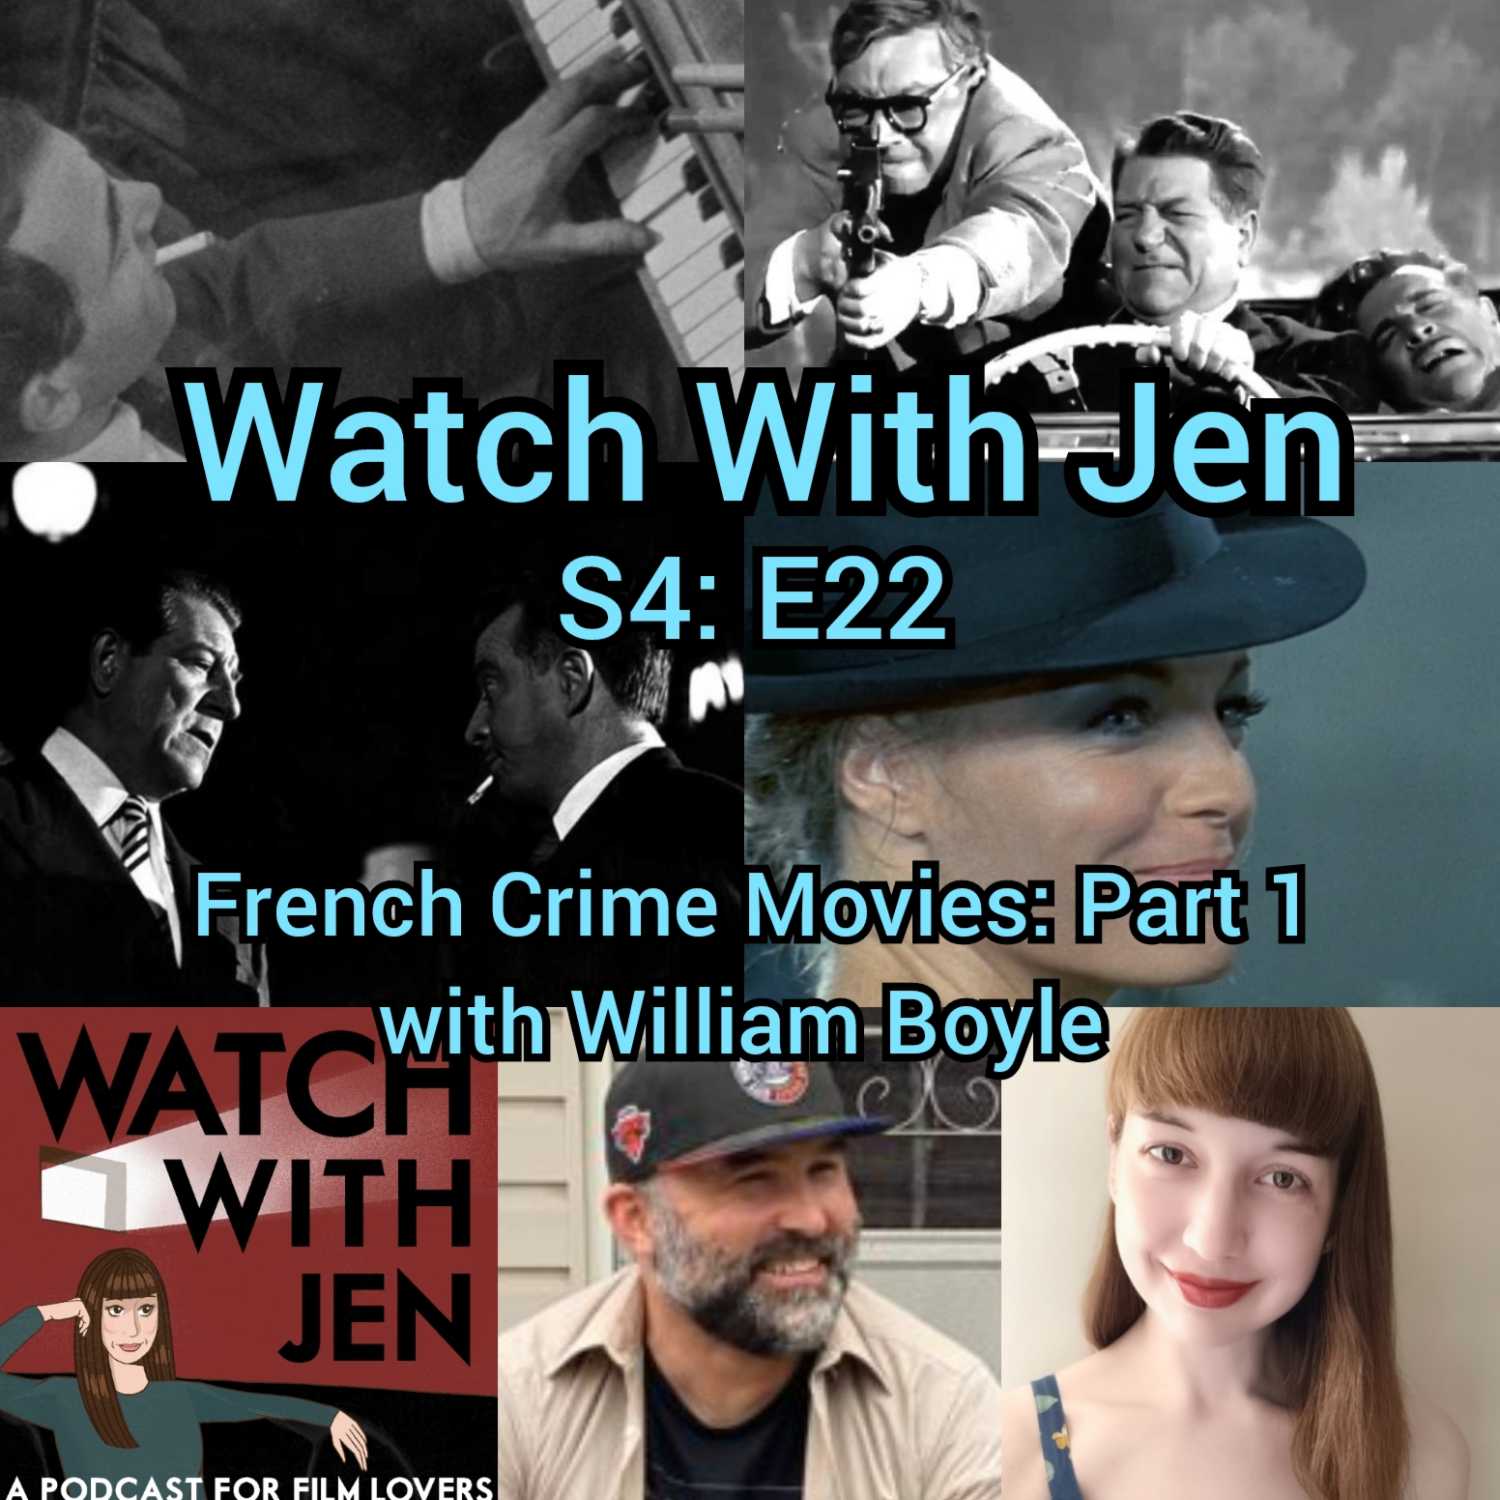 Watch With Jen - S4: E22 - French Crime Movies: Part 1 with William Boyle